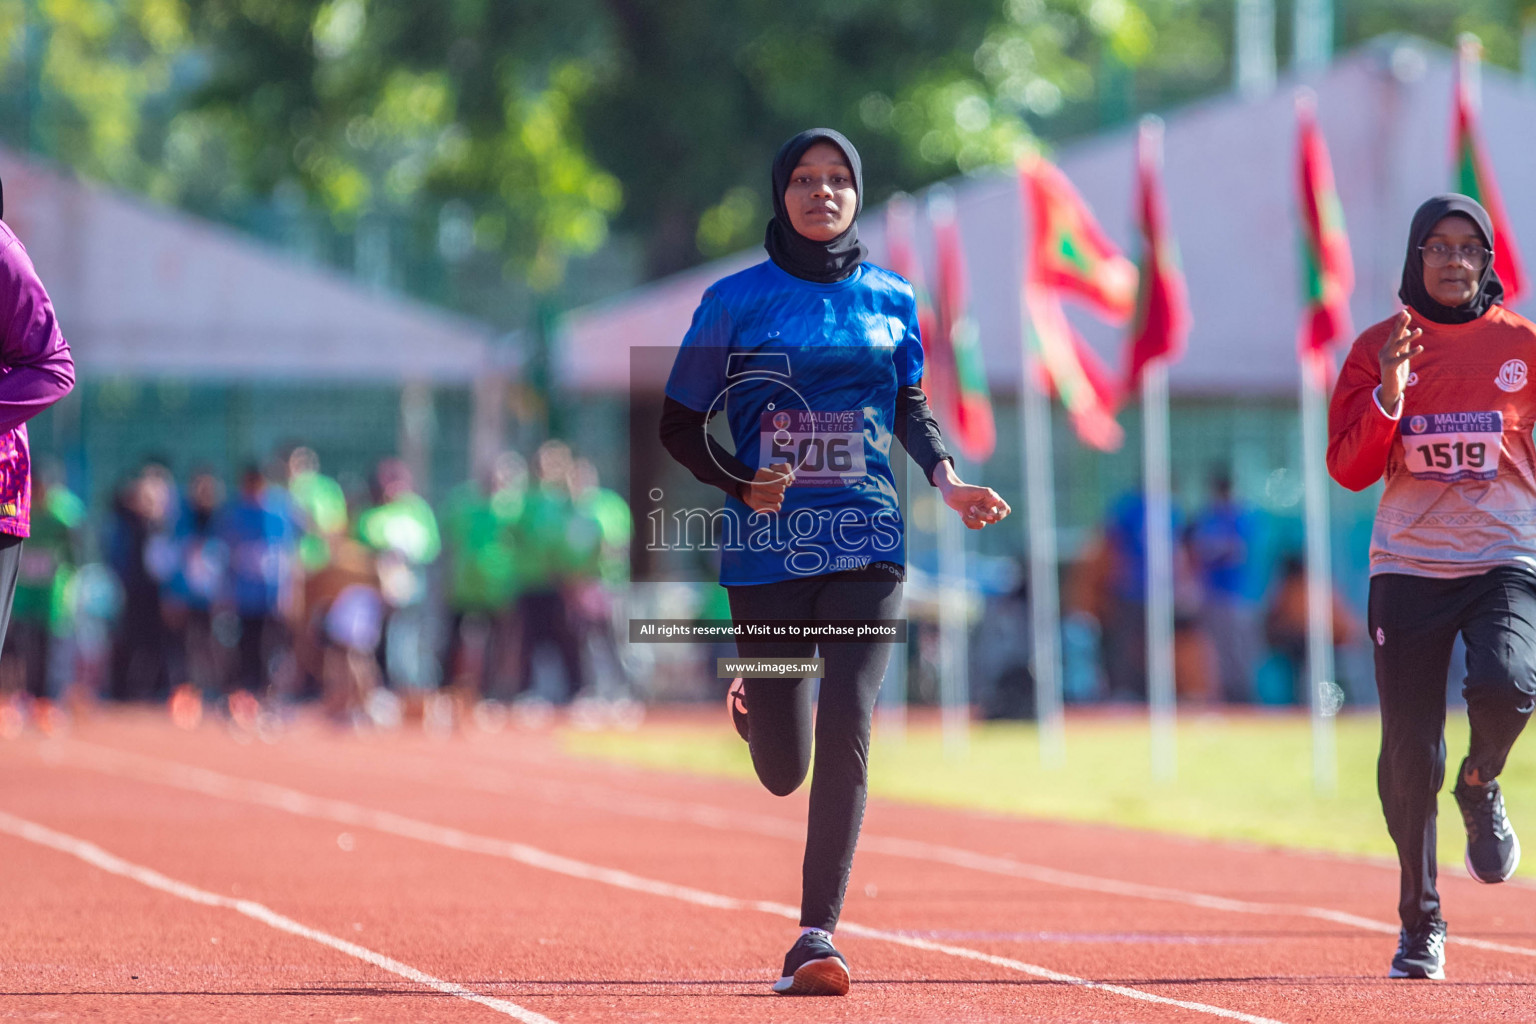 Day 1 of Inter-School Athletics Championship held in Male', Maldives on 22nd May 2022. Photos by: Maanish / images.mv